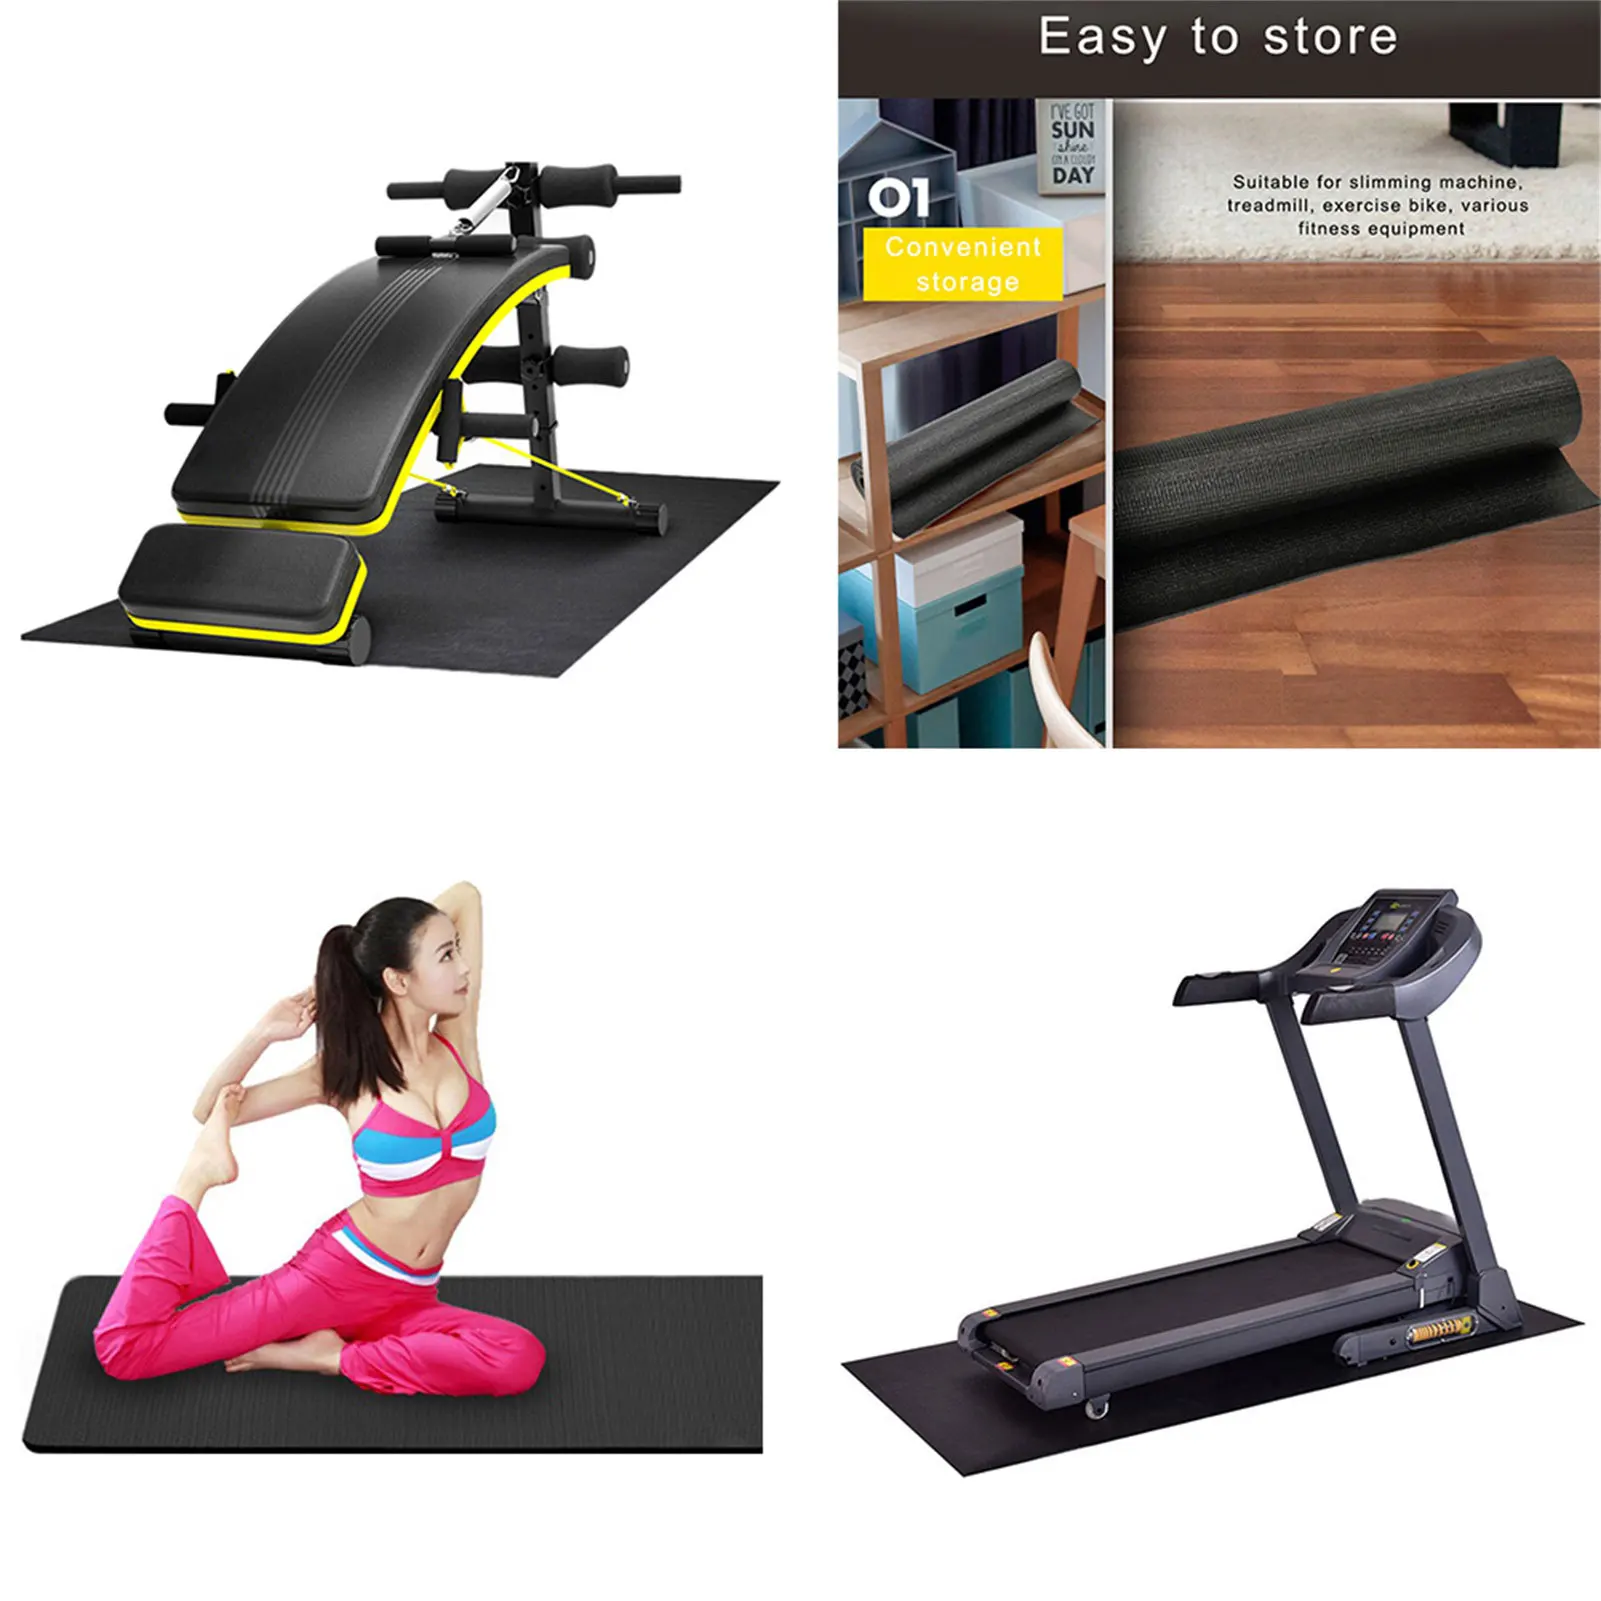 https://ae01.alicdn.com/kf/H5c1535747d5e49ad97755ac56abd8845T/WalkingPad-Mat-For-Treadmill-Protect-Floor-Anti-skid-Quiet-Yoga-Slimming-Exercise-Workout-Fitness-Durable-Equipment.jpg